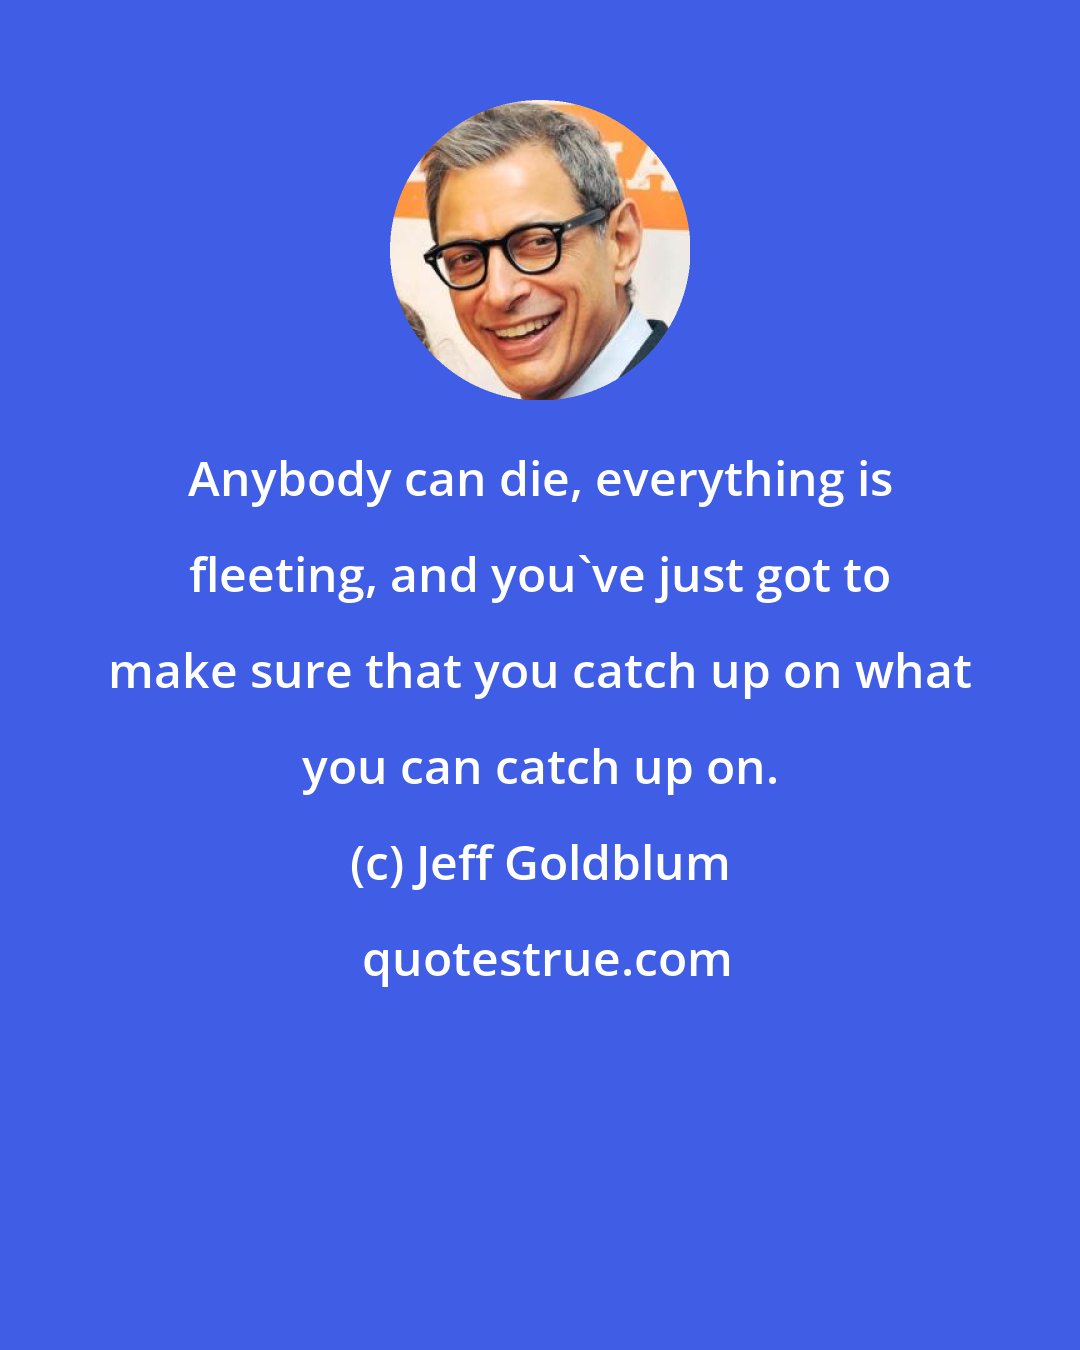 Jeff Goldblum: Anybody can die, everything is fleeting, and you've just got to make sure that you catch up on what you can catch up on.